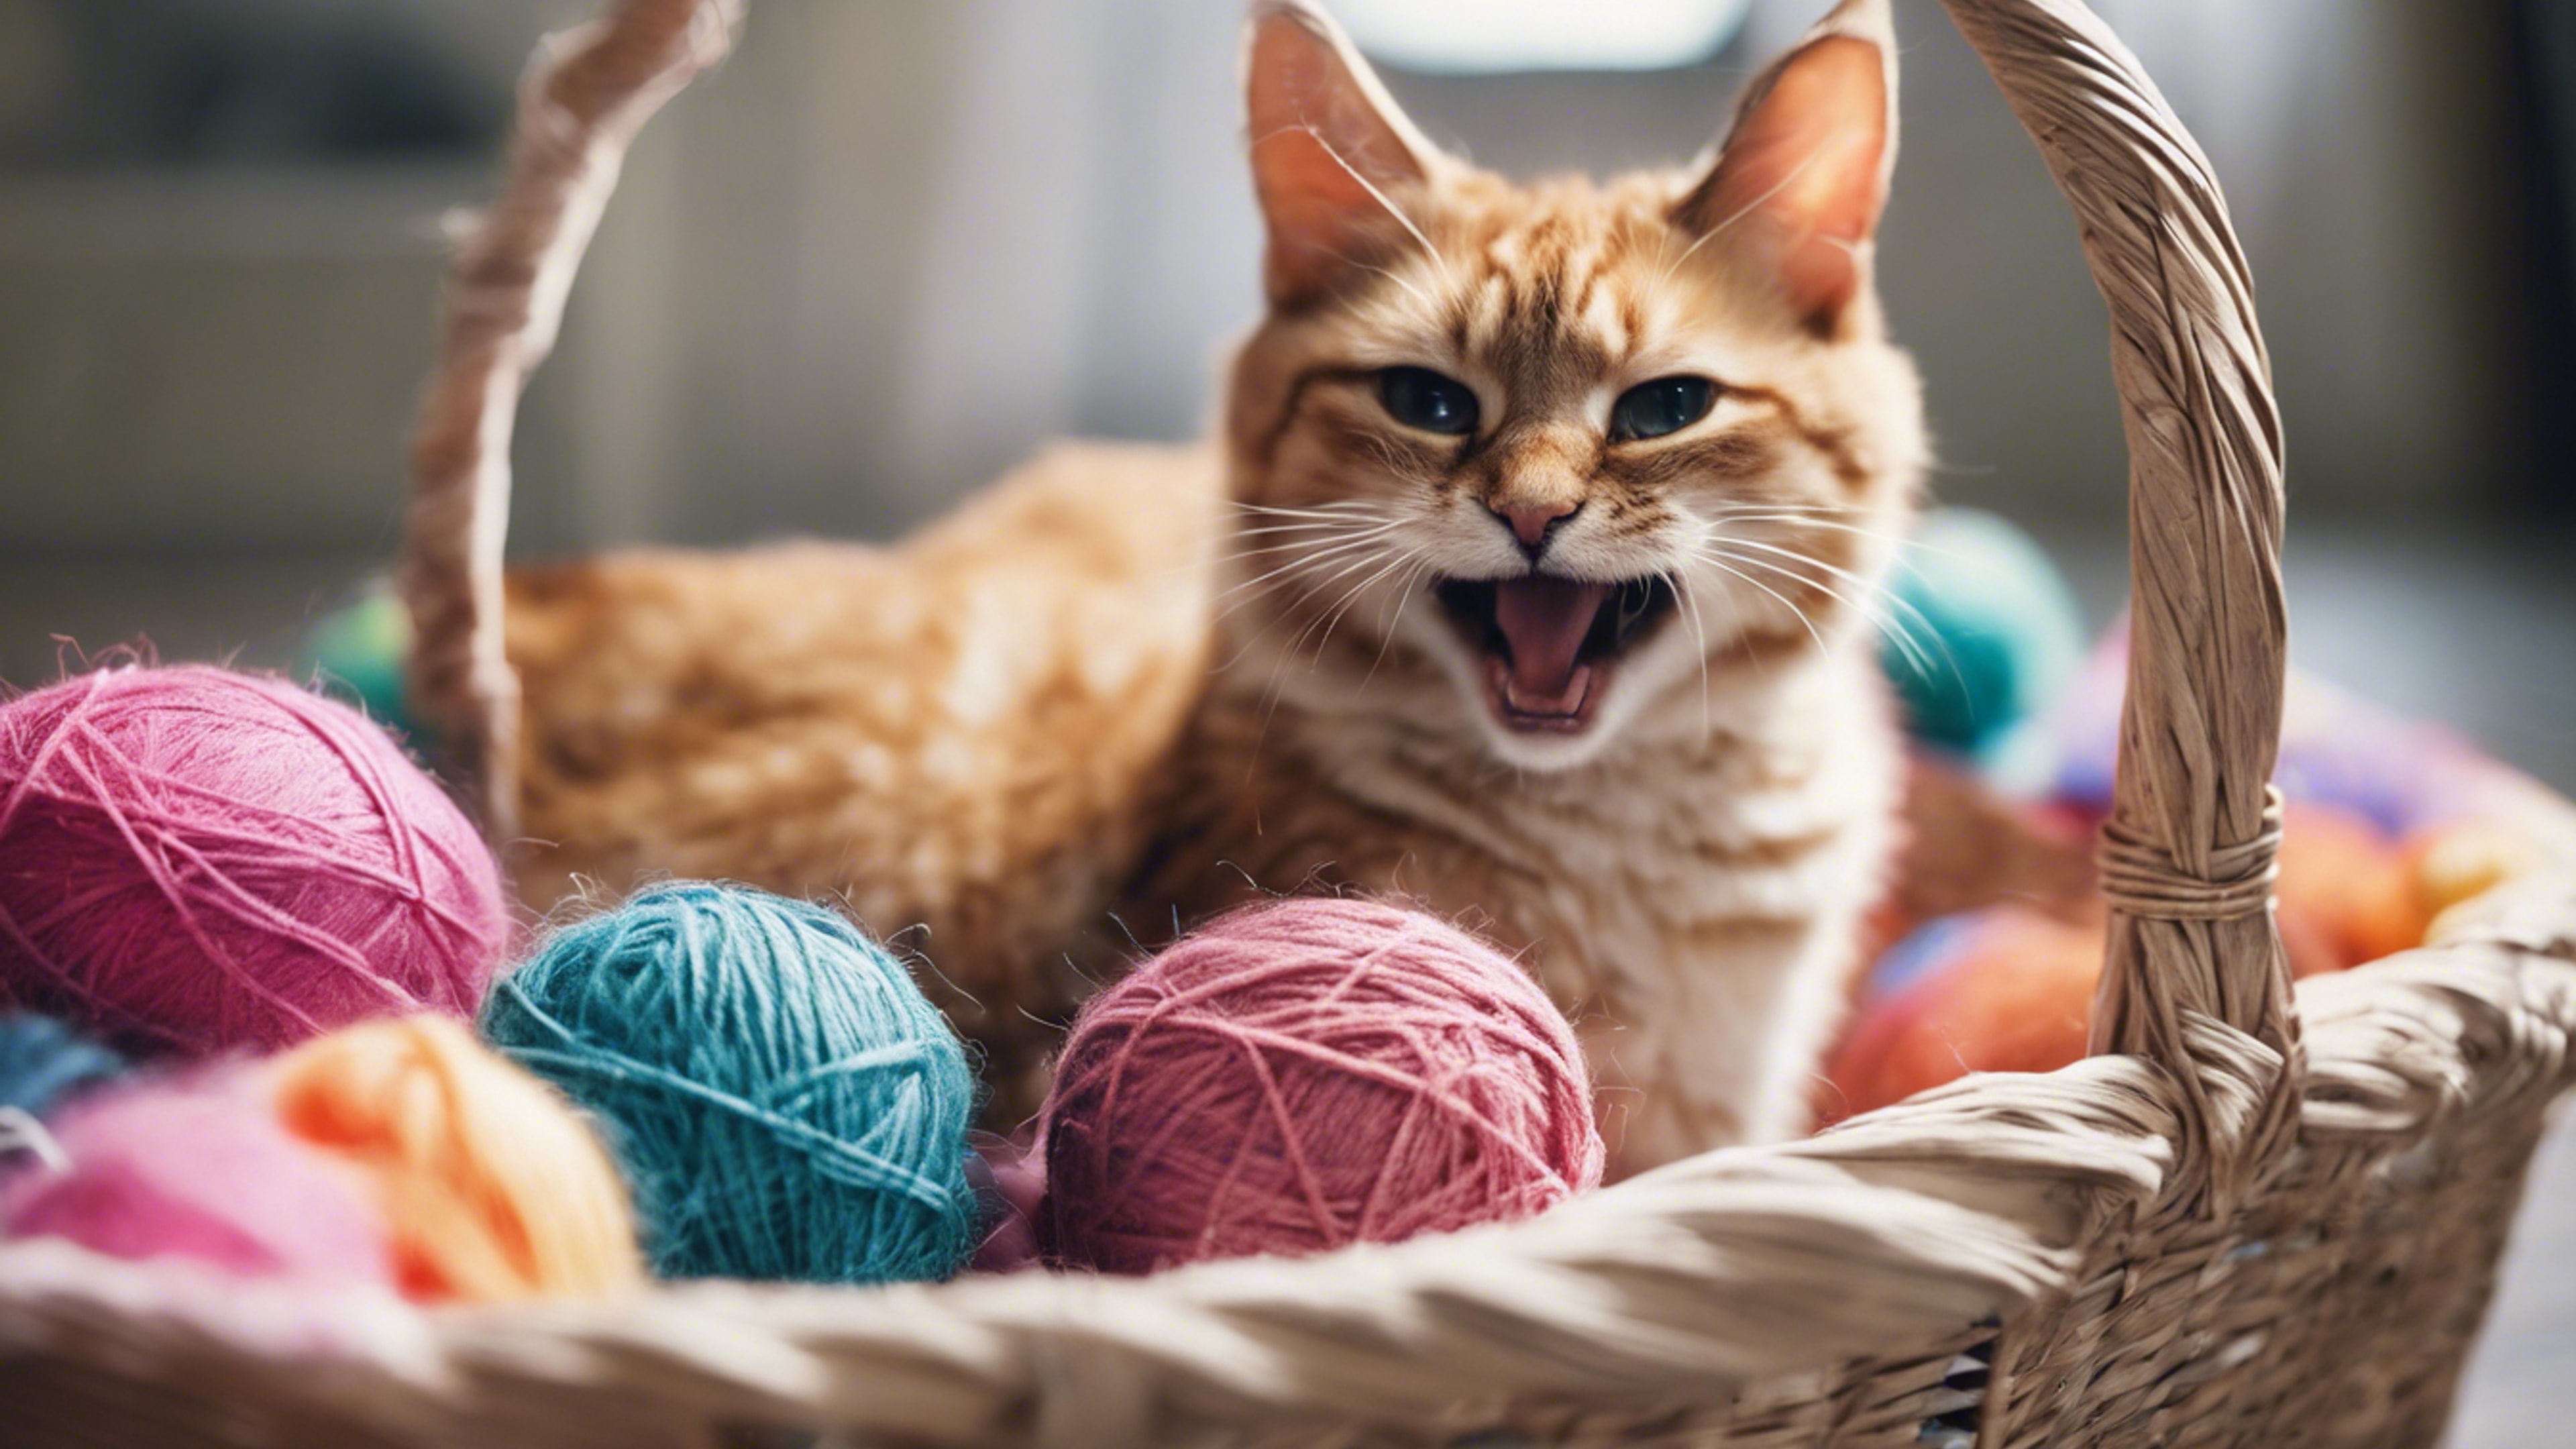 A cat mid-yawn in a basket filled with soft, colorful balls of yarn. טפט[4de2b2f4a75d42f7bbf8]